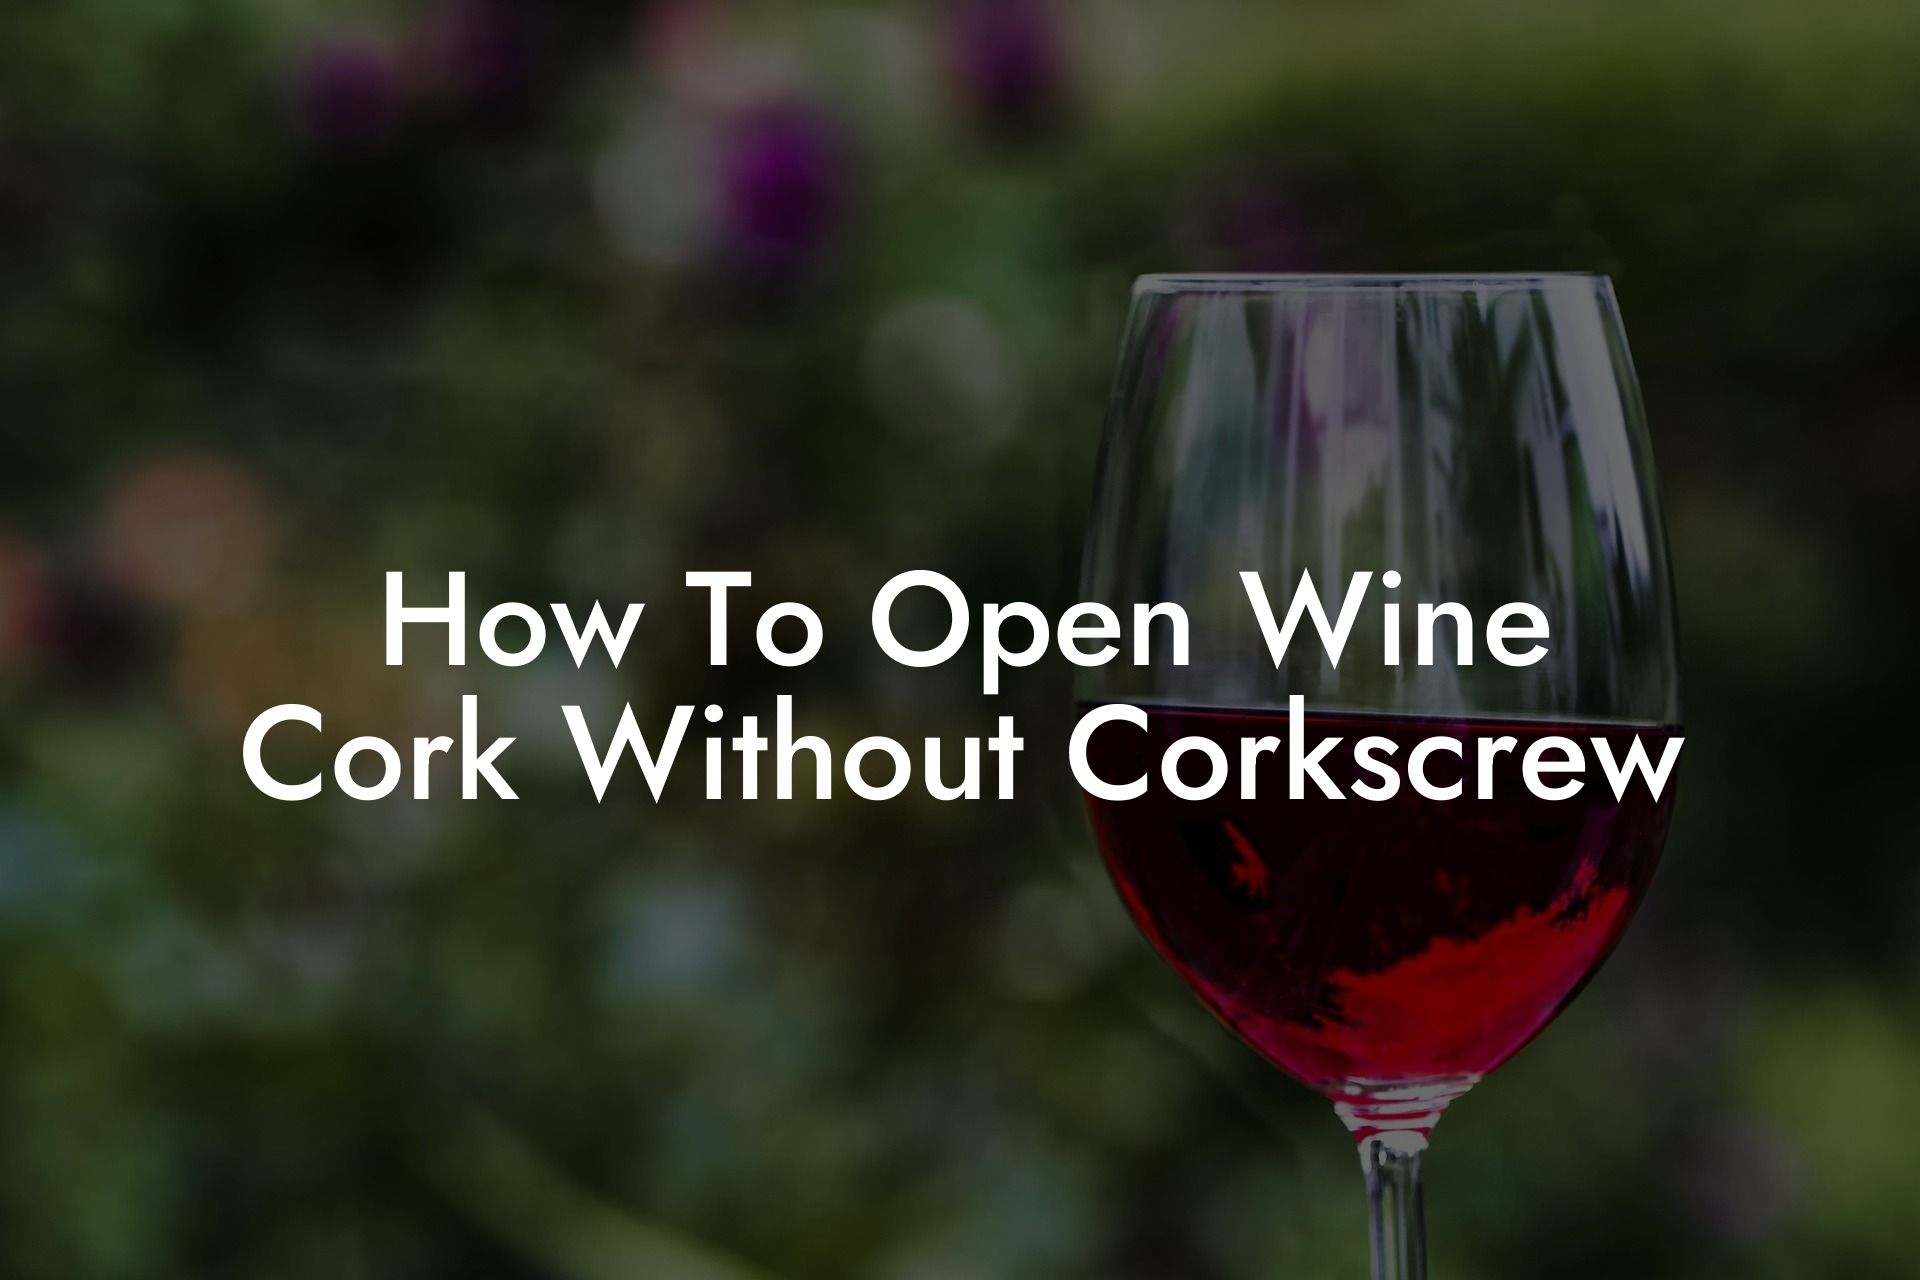 How To Open Wine Cork Without Corkscrew